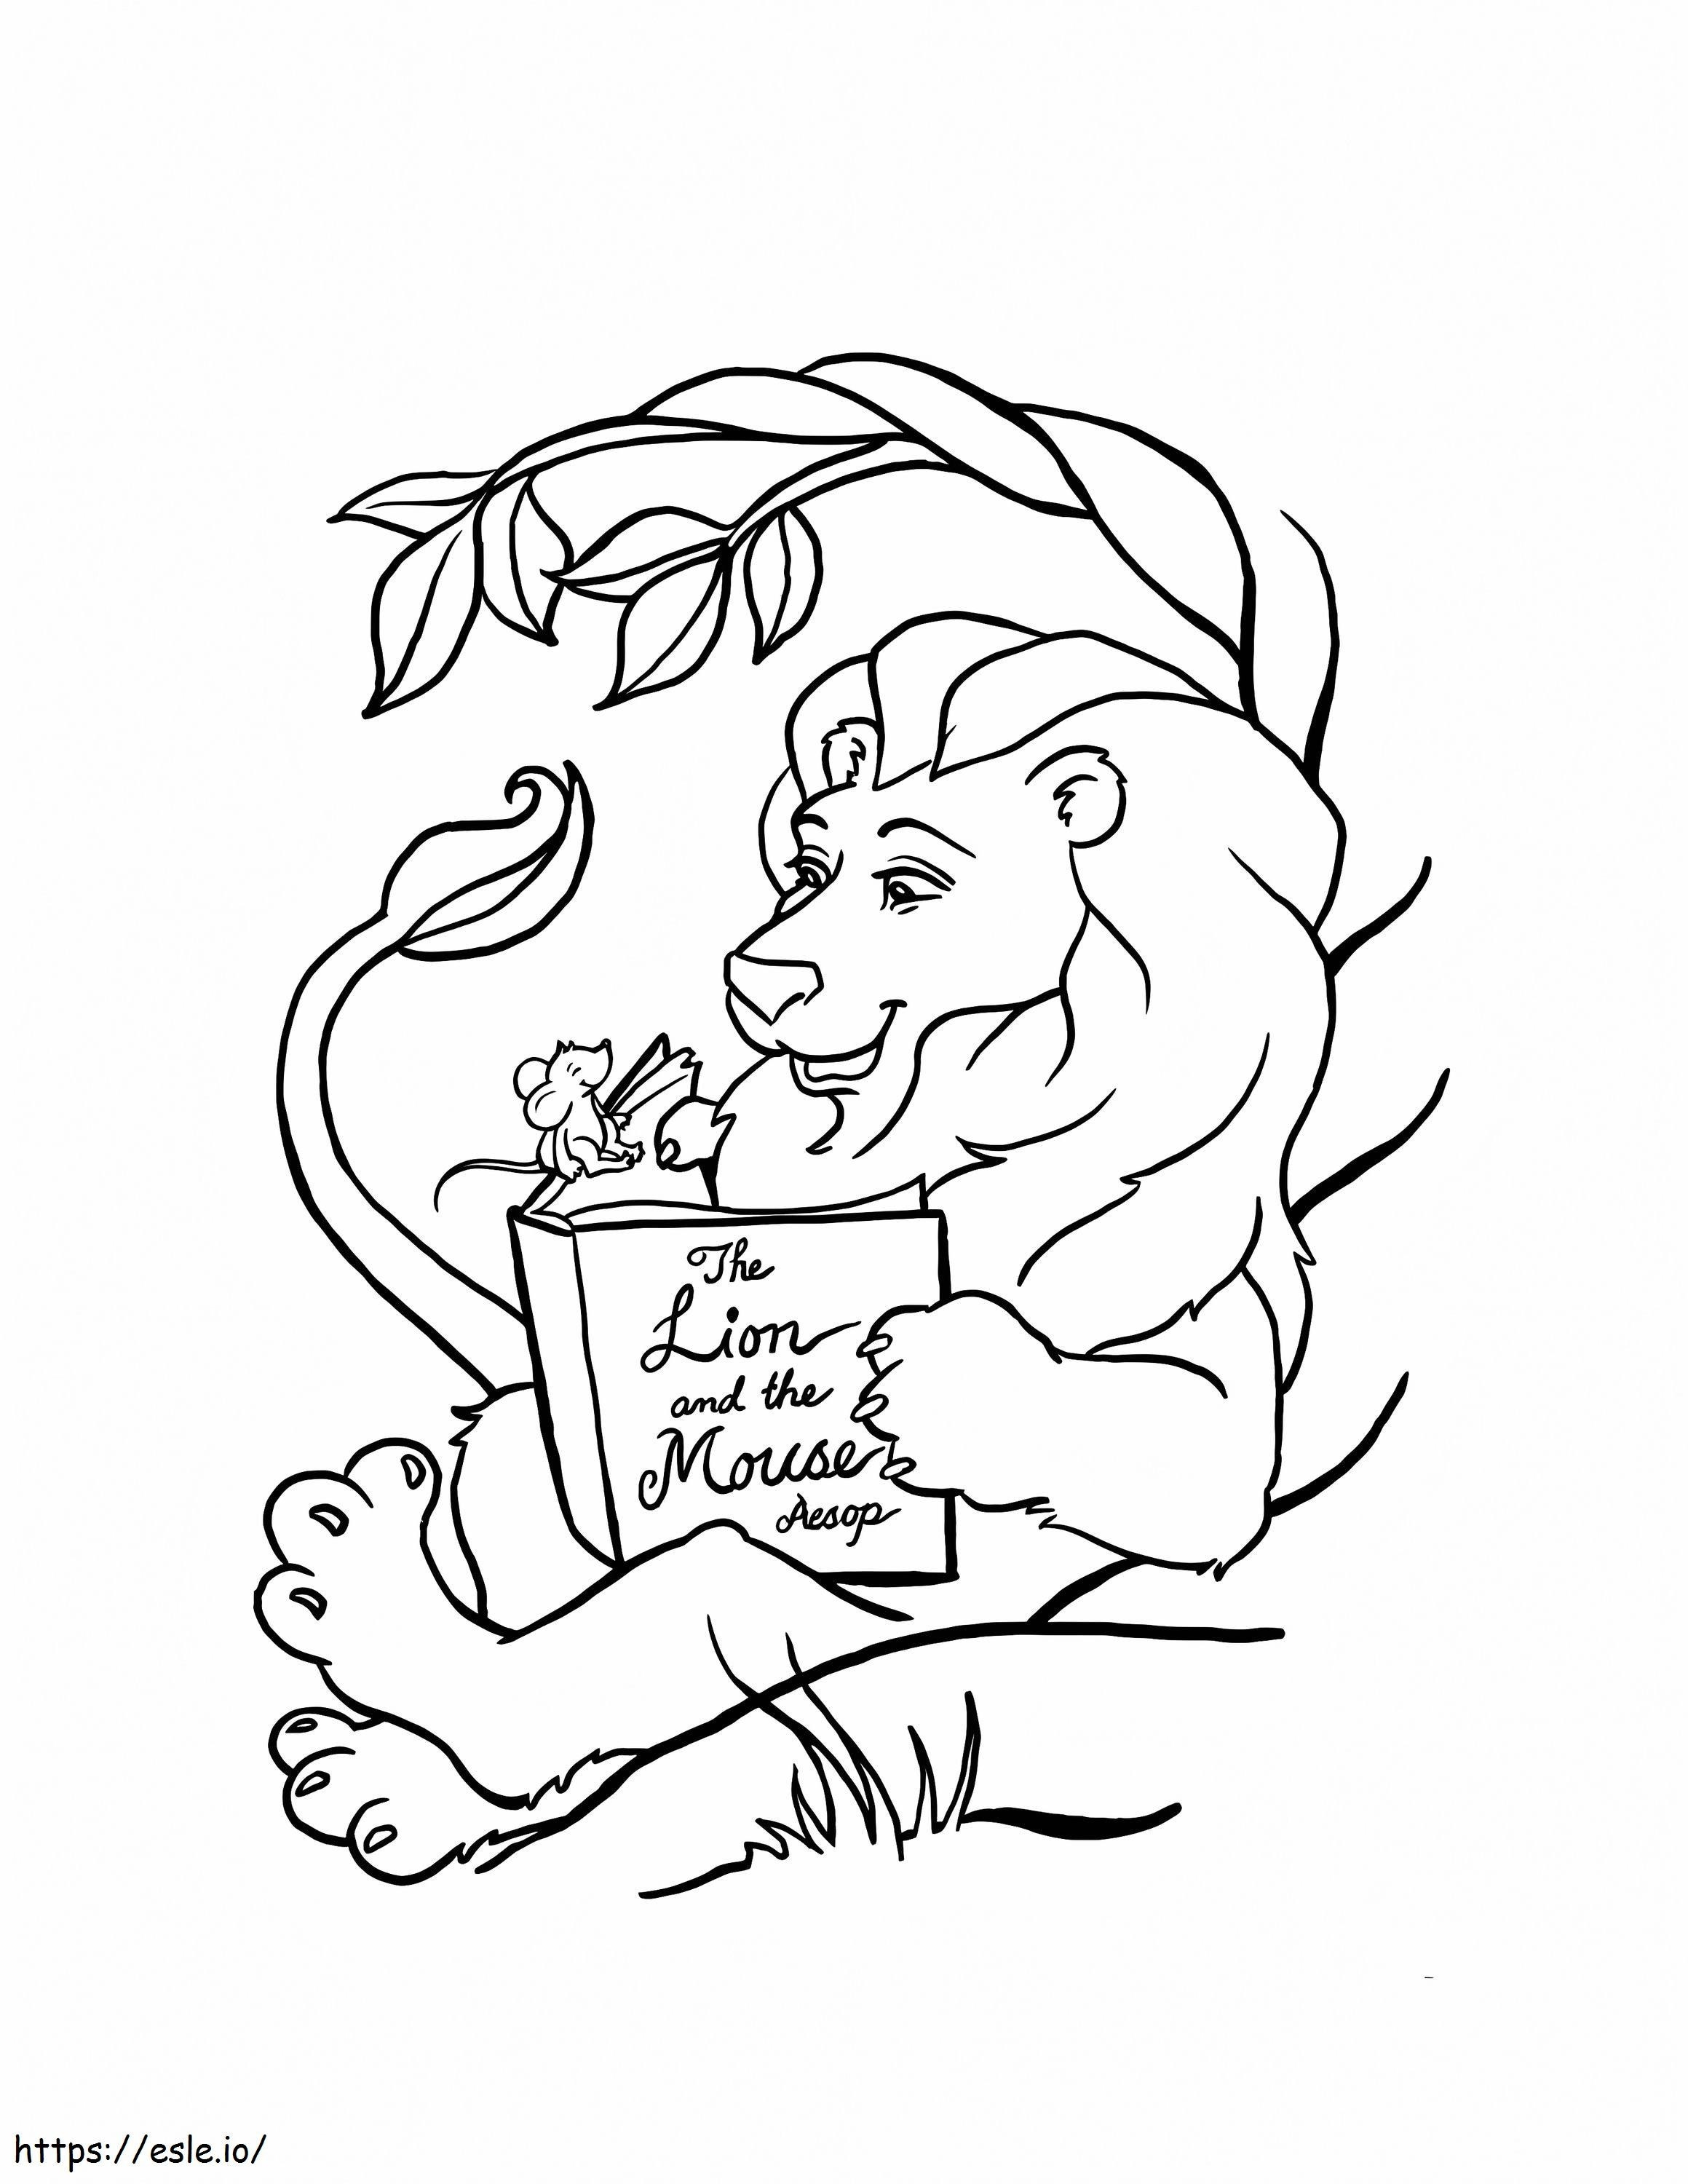 Lion And Mouse coloring page